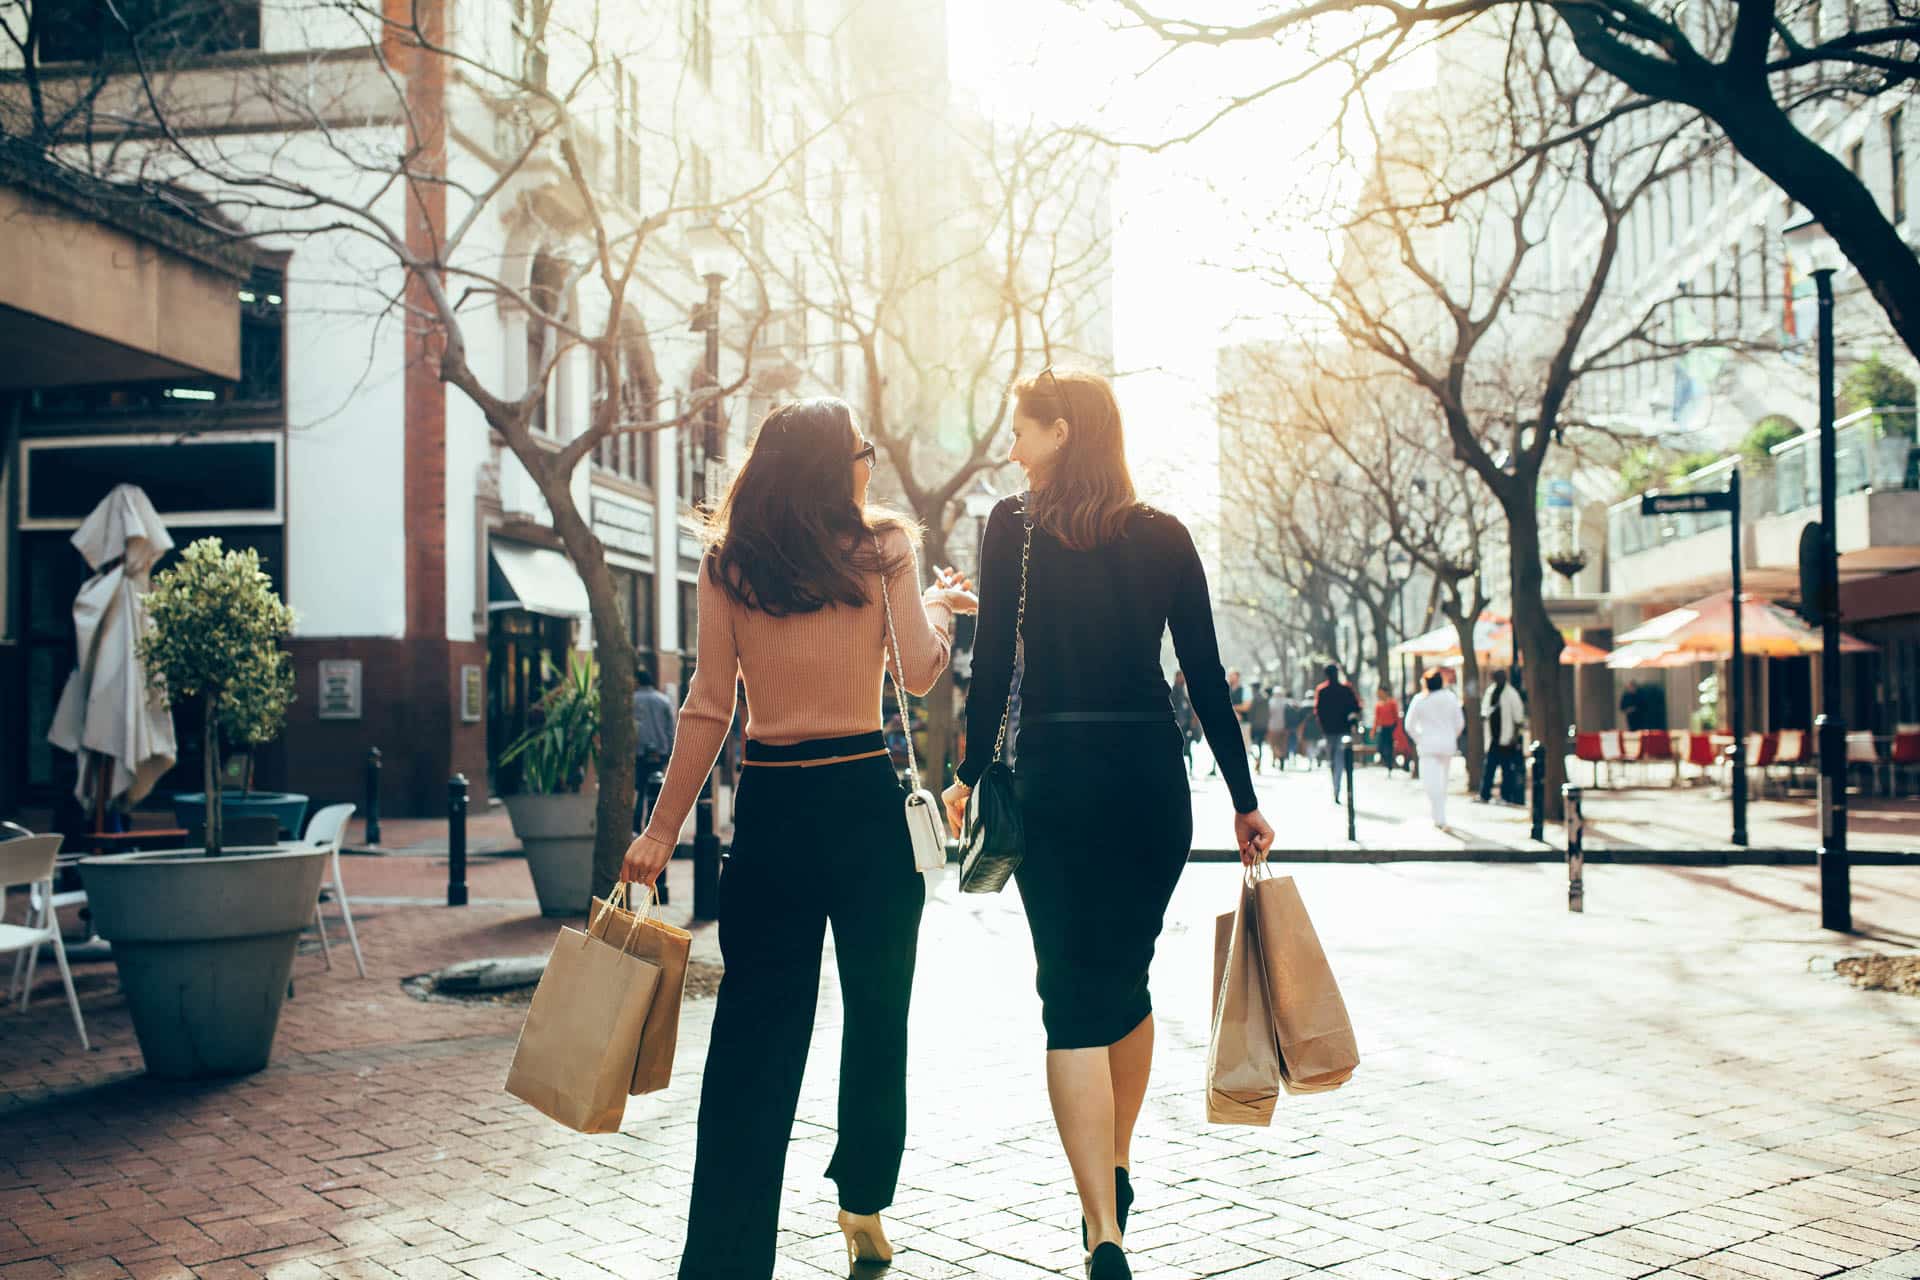 Rear view of two friends walking on the city street with shopping bags. Female shoppers carrying shopping bags while walking along the road.